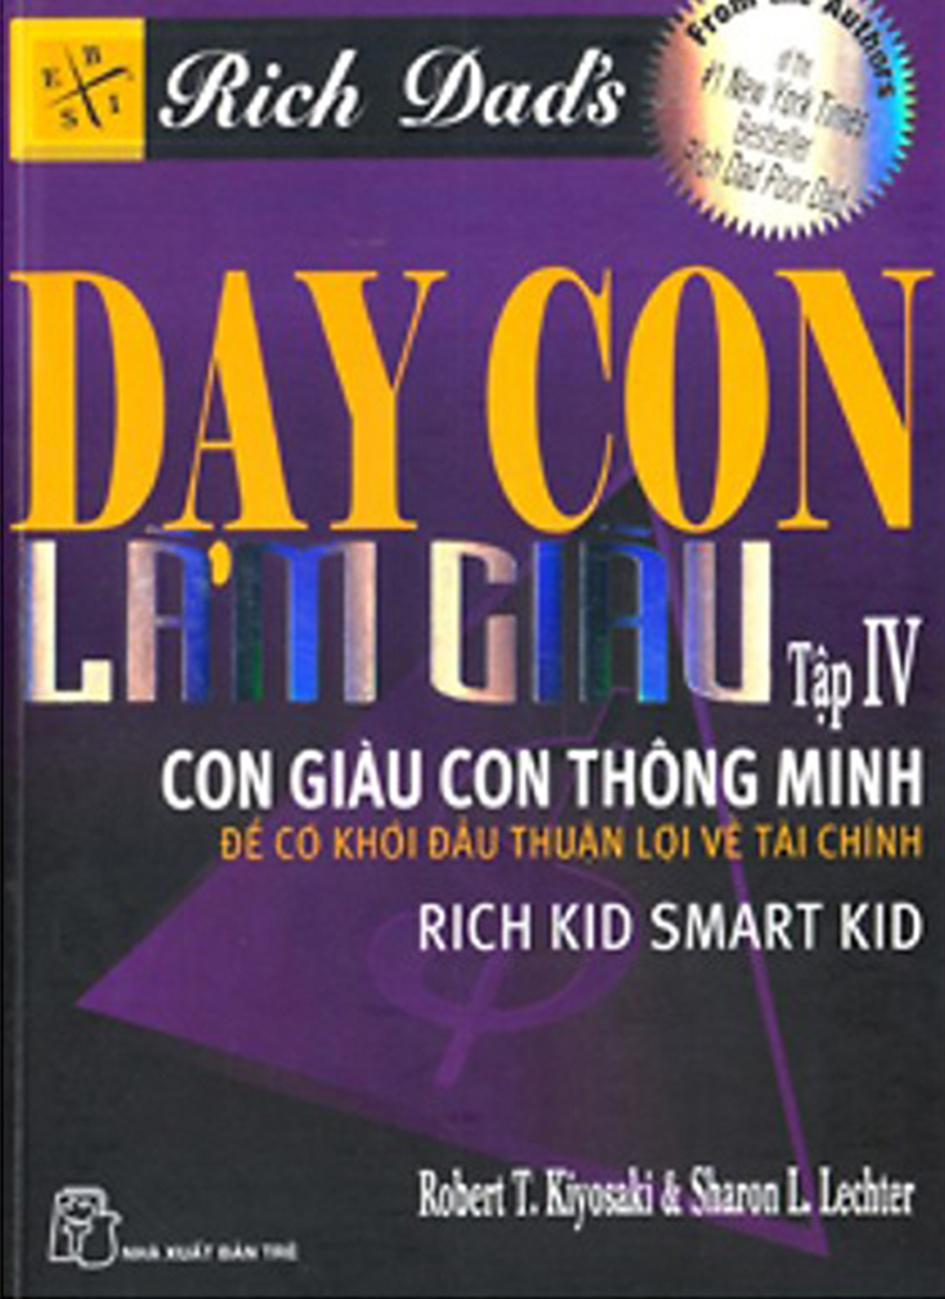 day con lam giau 4